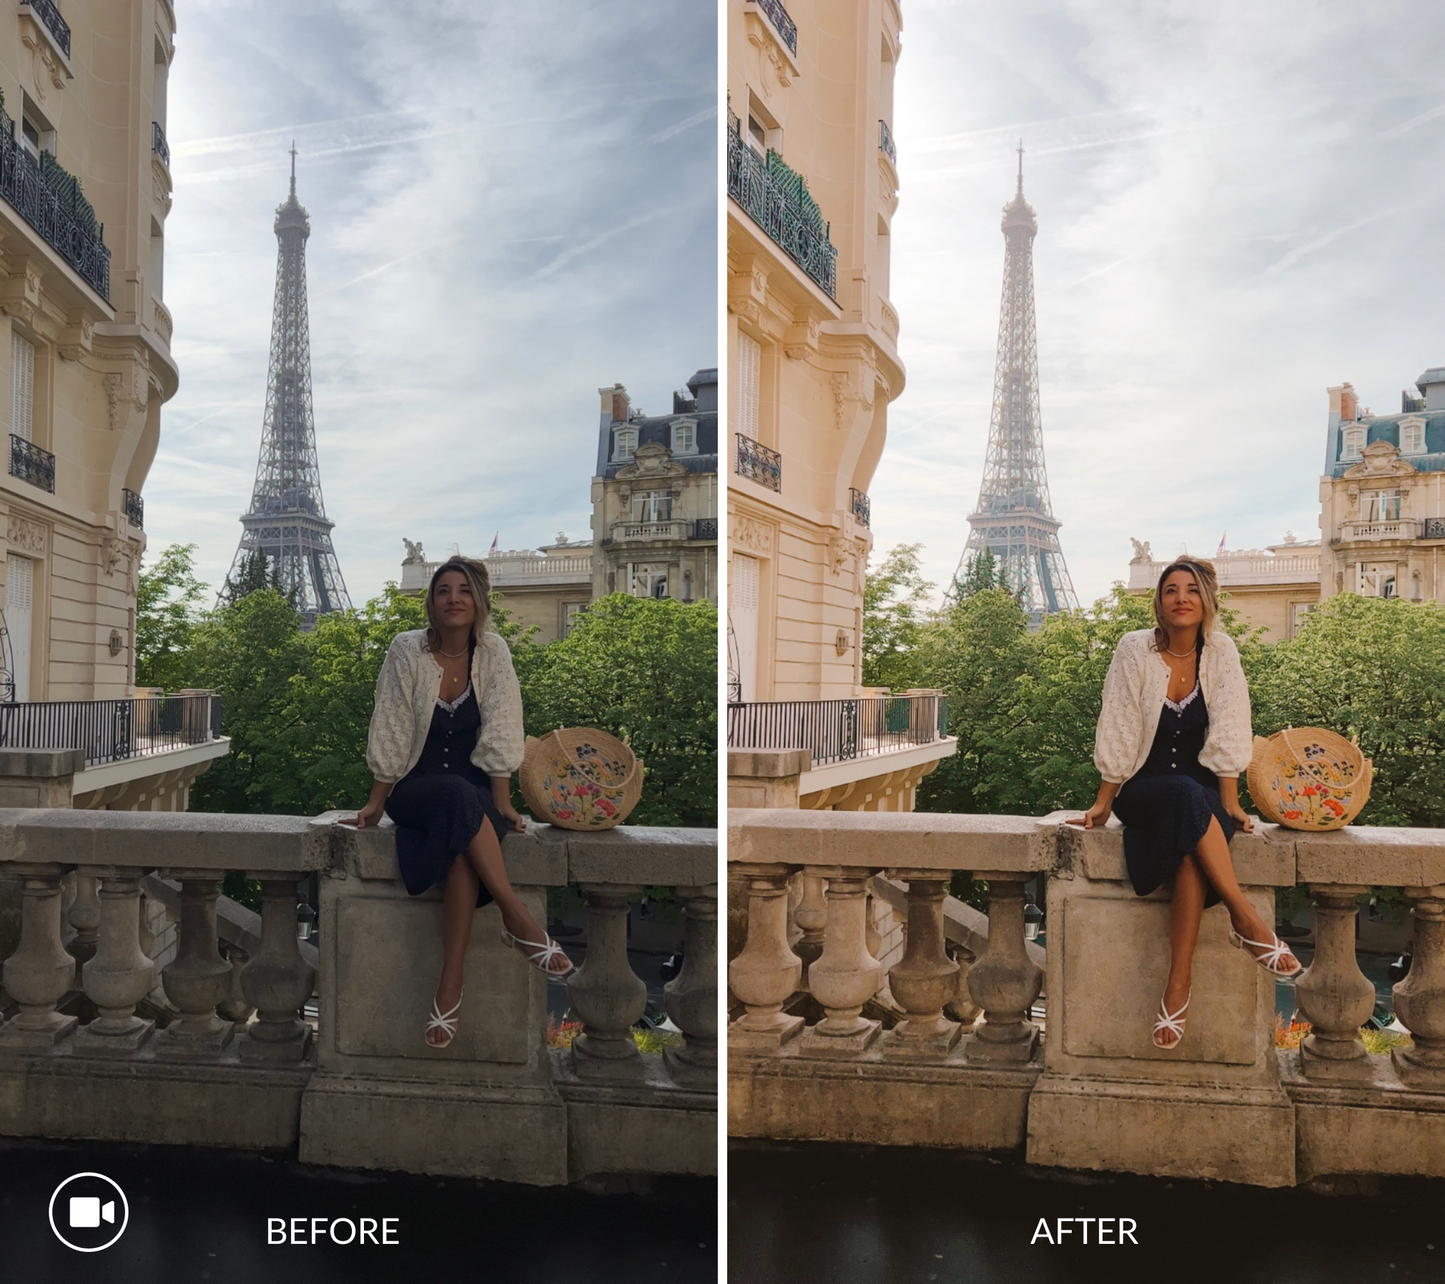 bright and airy iphone LUTs (video filters)